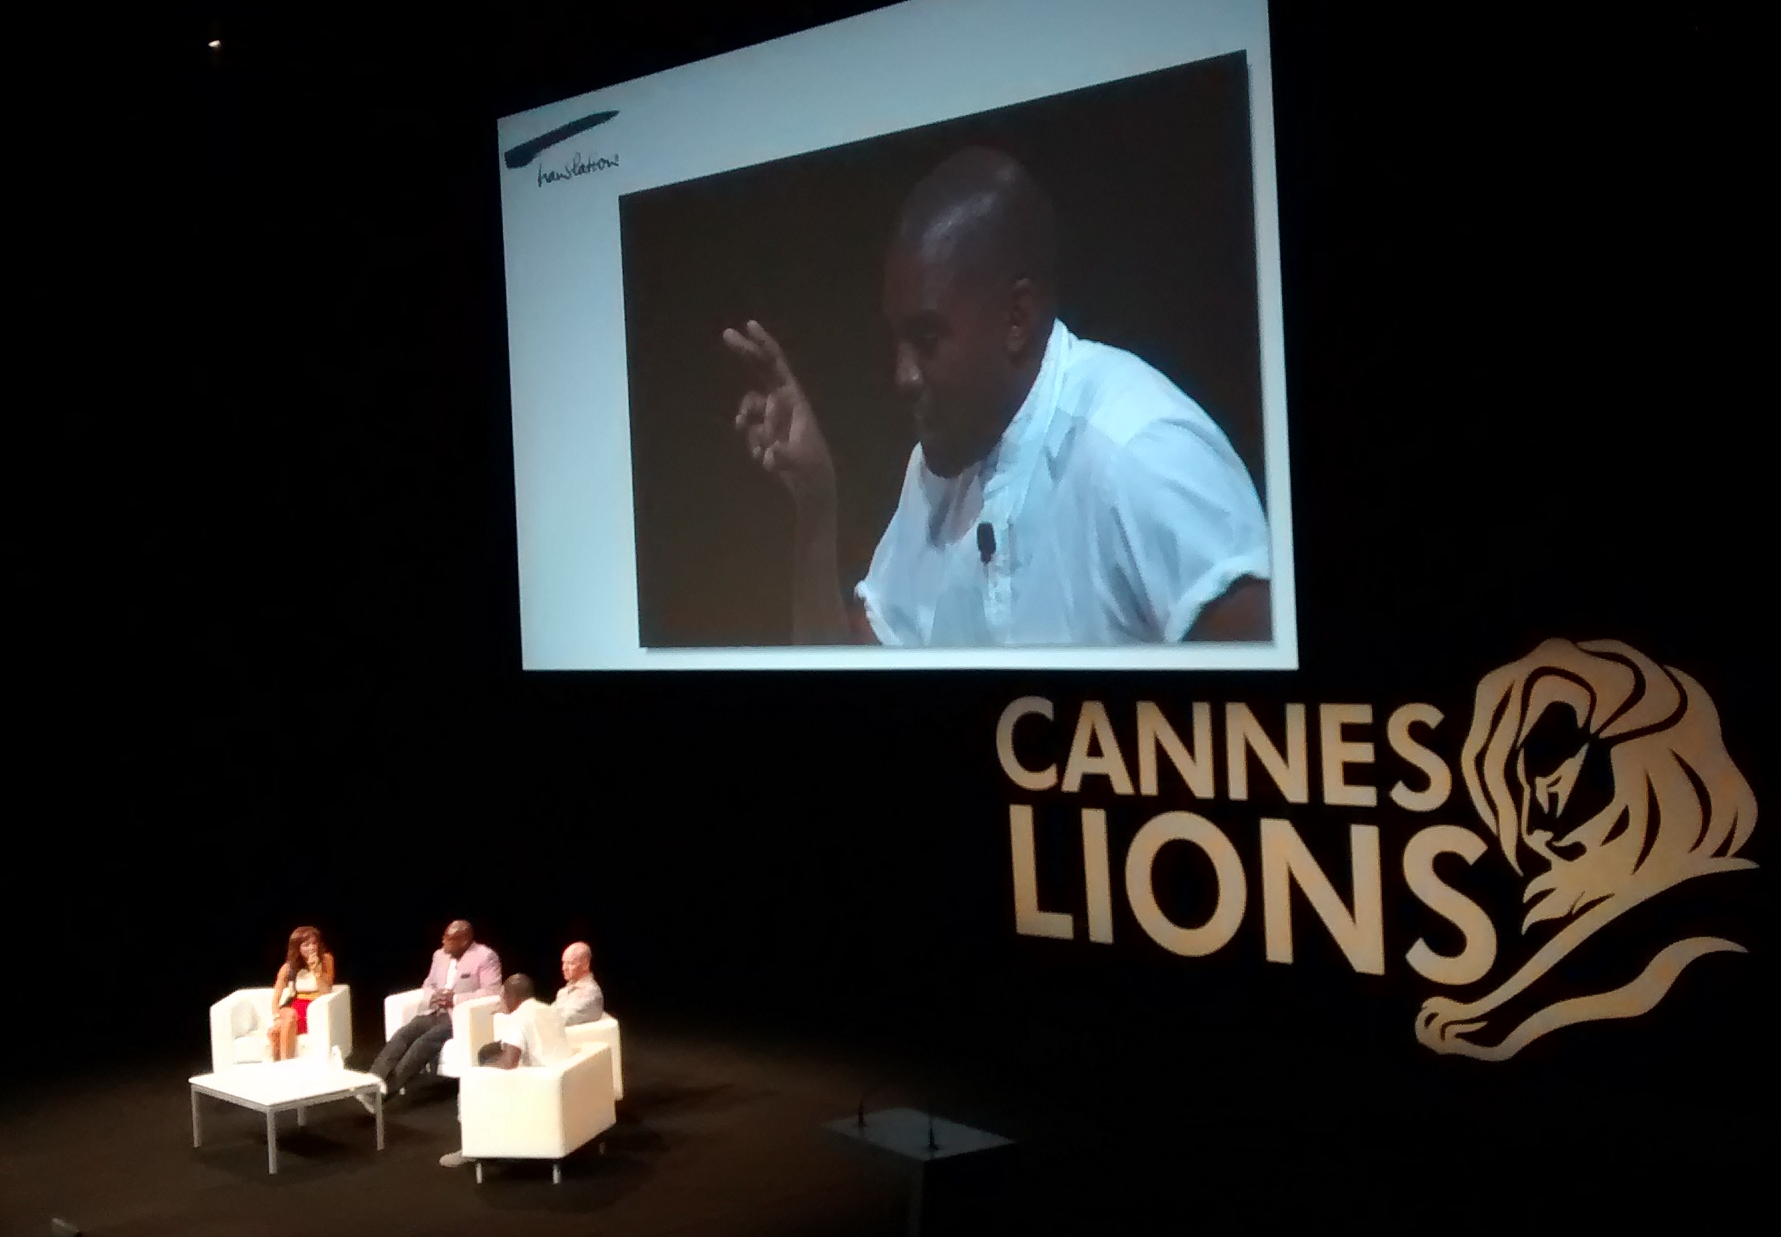 “The Fall of BlackBerry and Rise of Apple is a Win for Creativity” – Kanye West Talks Mobile at Cannes Lions